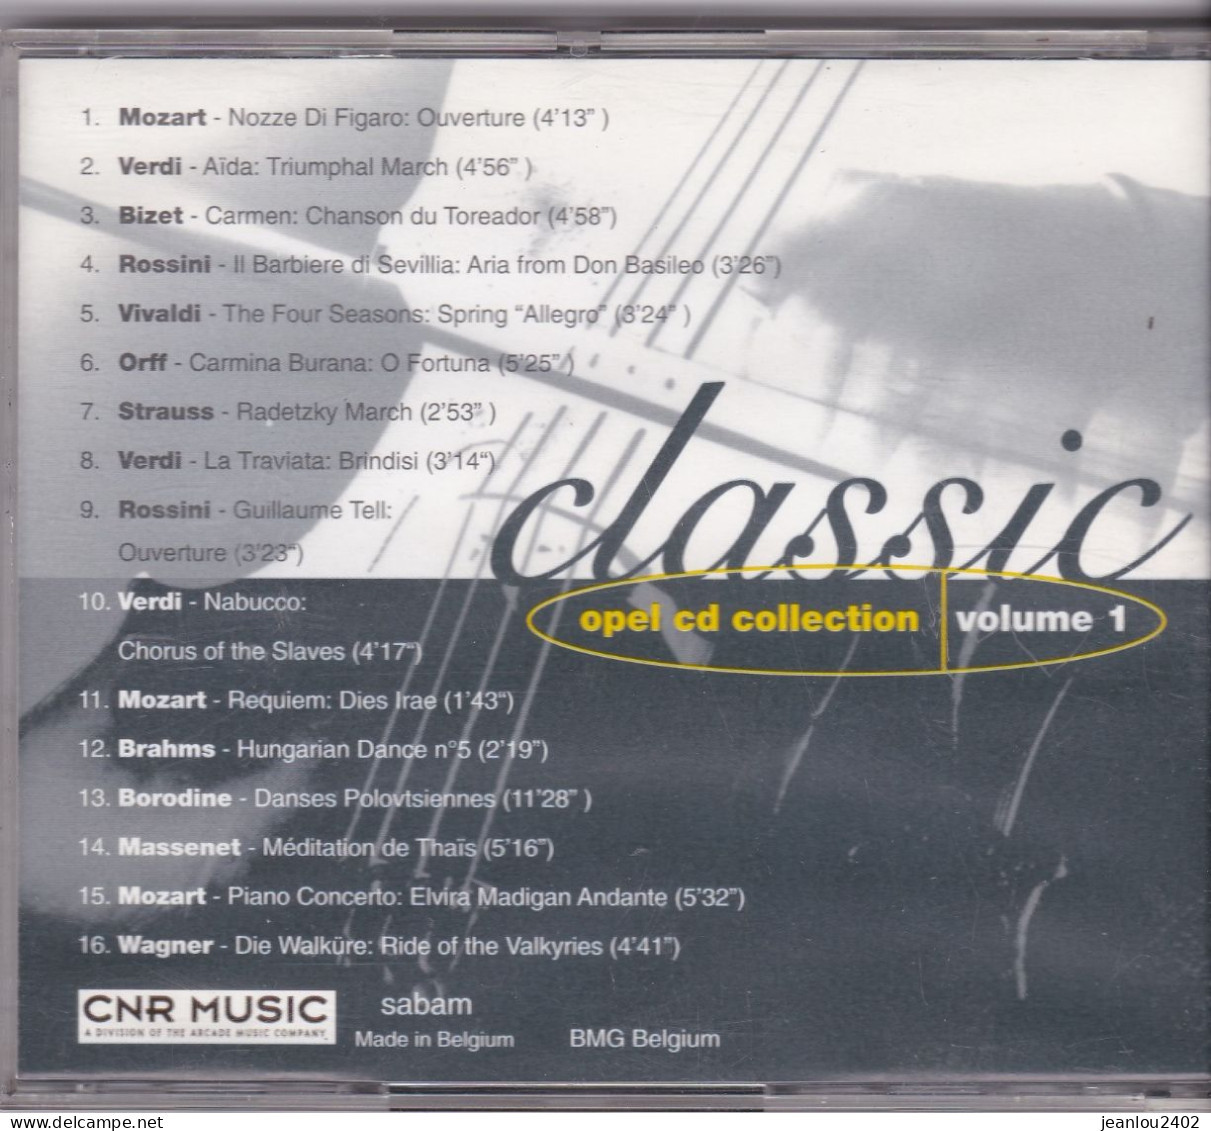 "OPEL CD COLLECTION VOLUME 1 " - "CLASSIC" - Collectors